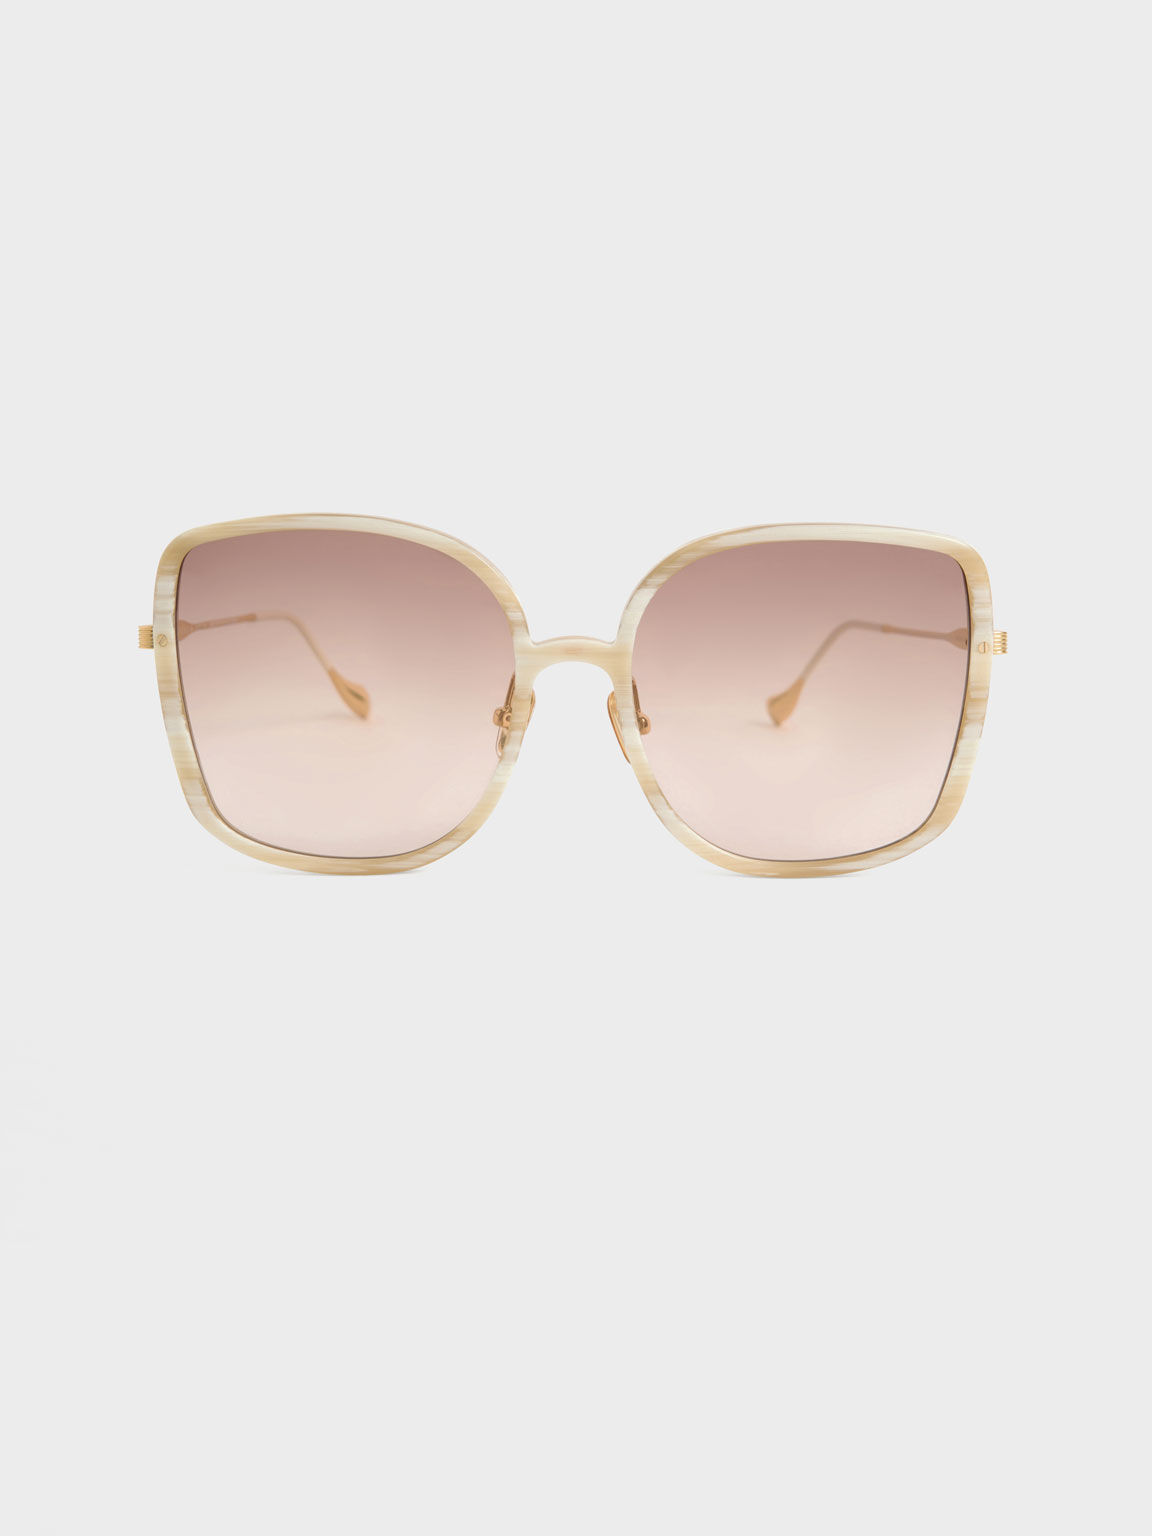 Women's Sunglasses | Exclusives Styles | CHARLES & KEITH UK